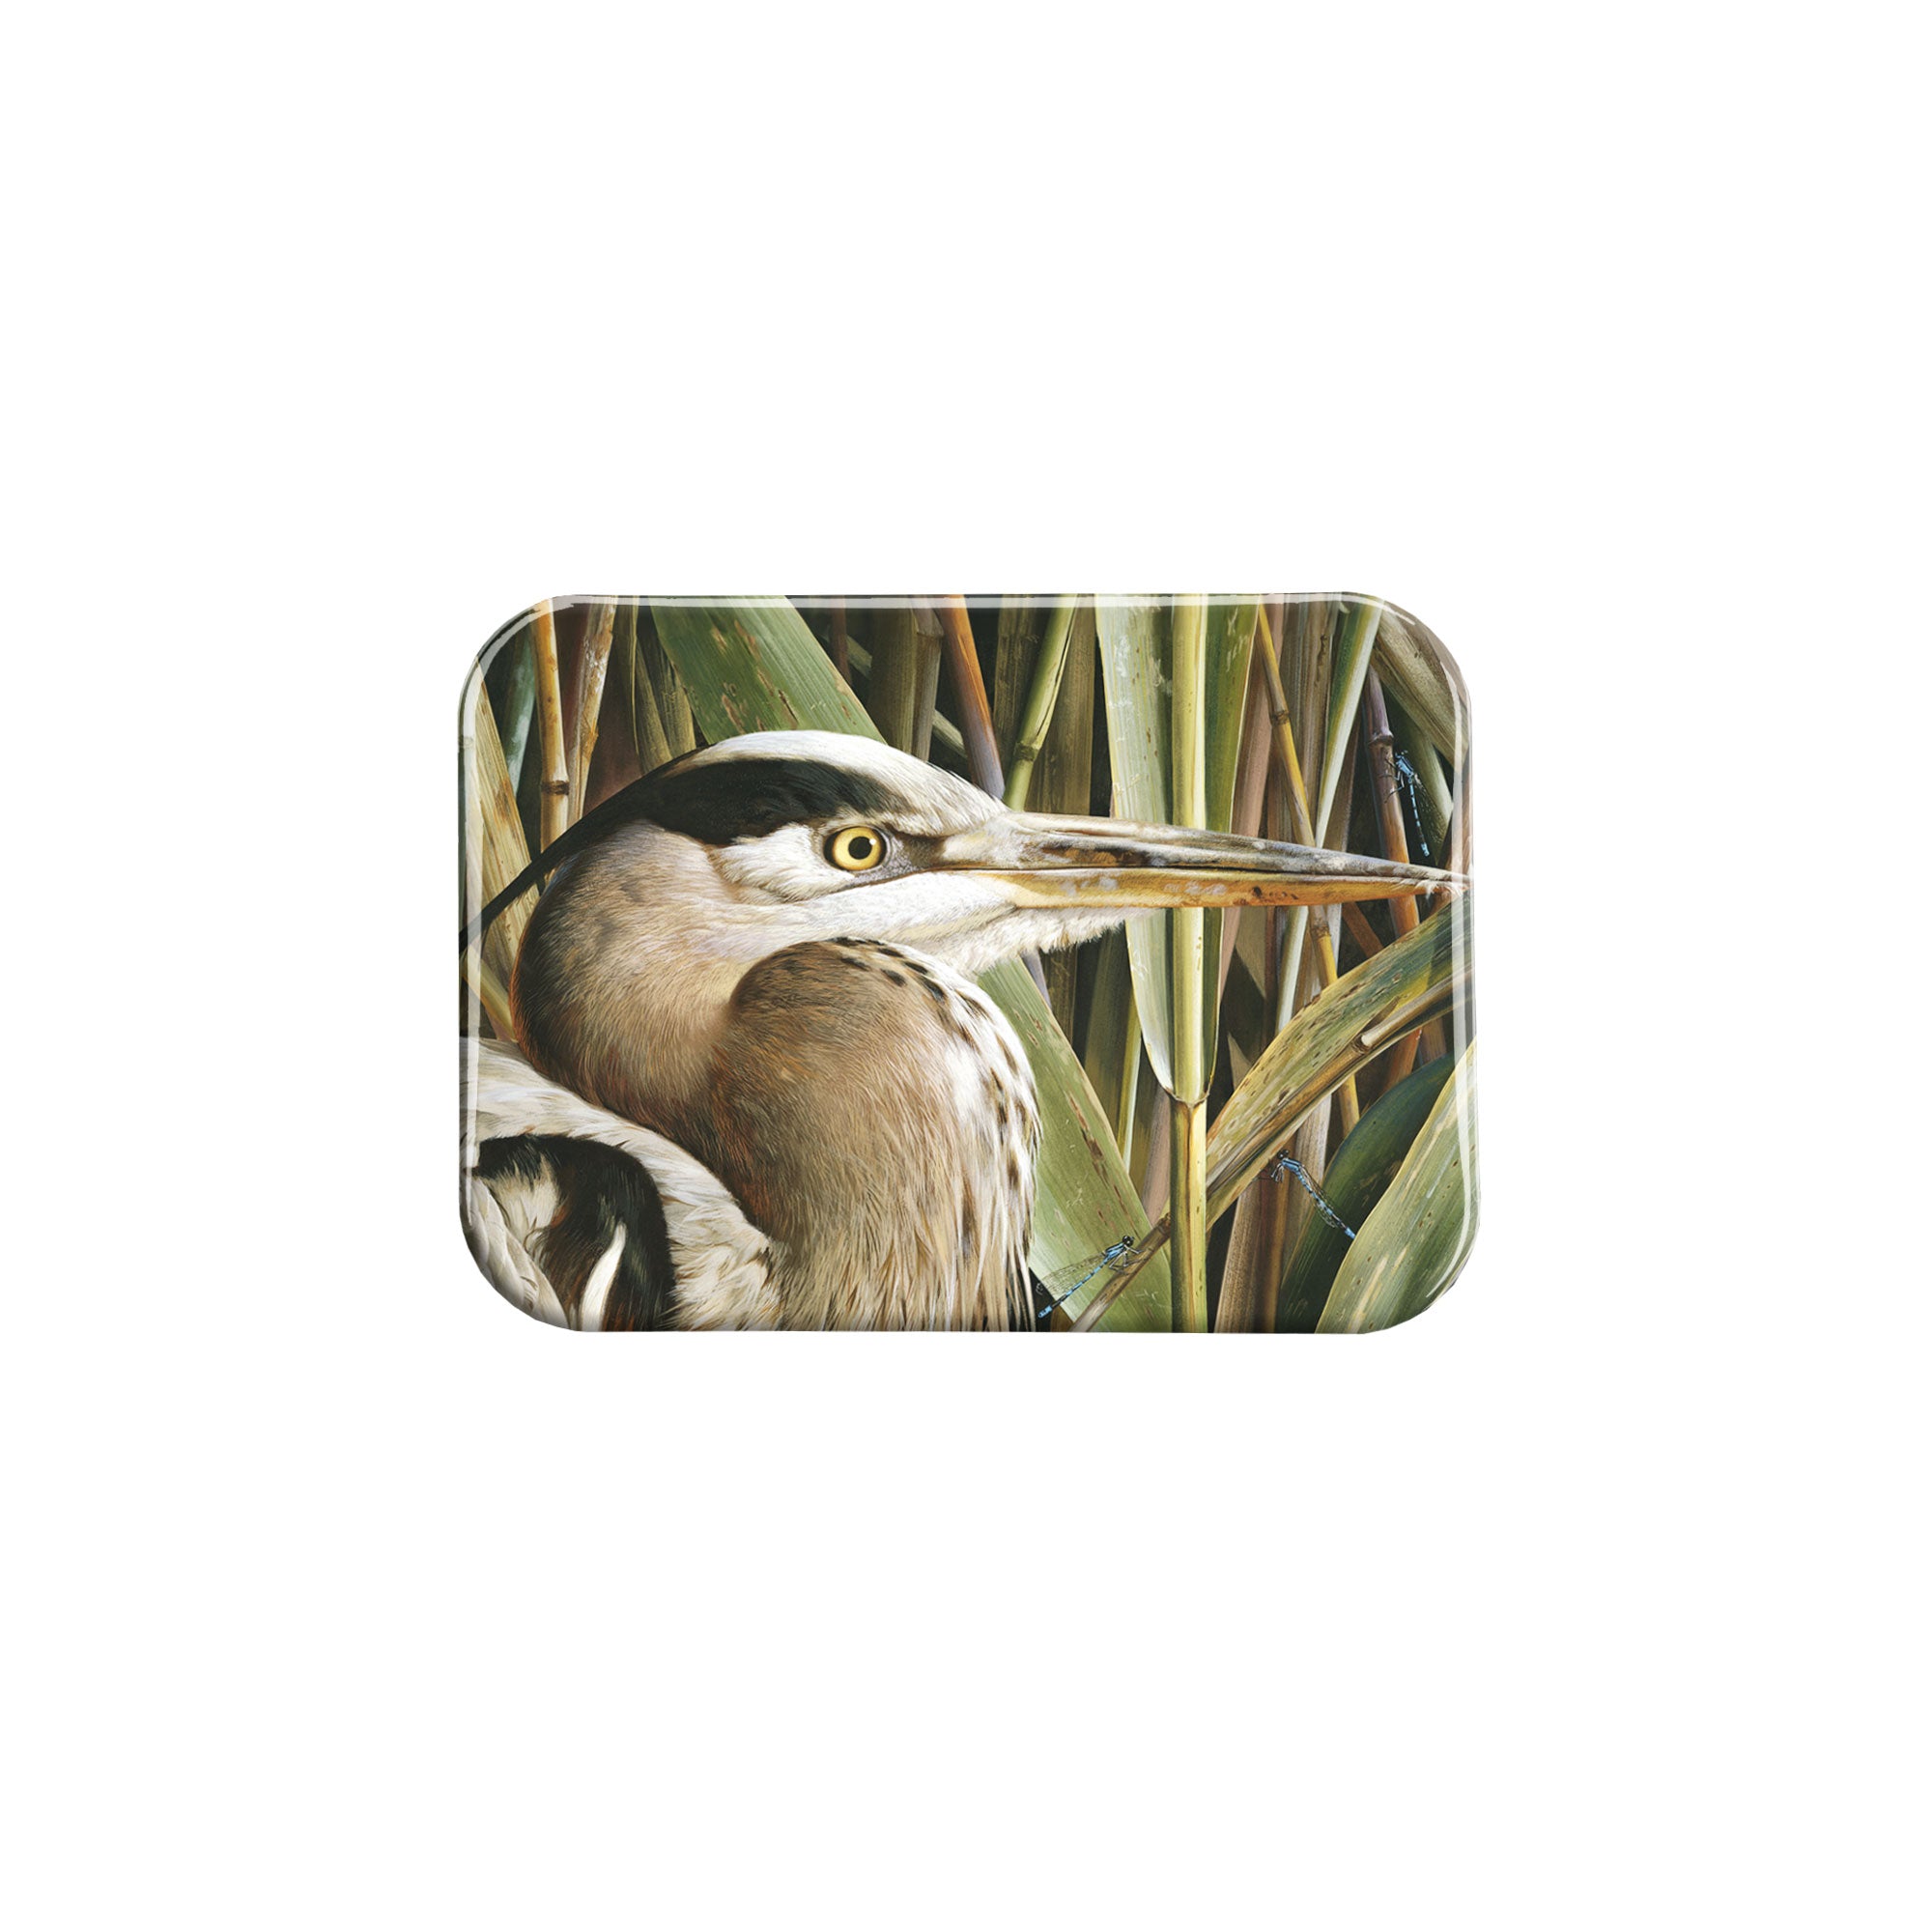 "Lord Of The Marshes" - 2.5" X 3.5" Rectangle Fridge Magnets